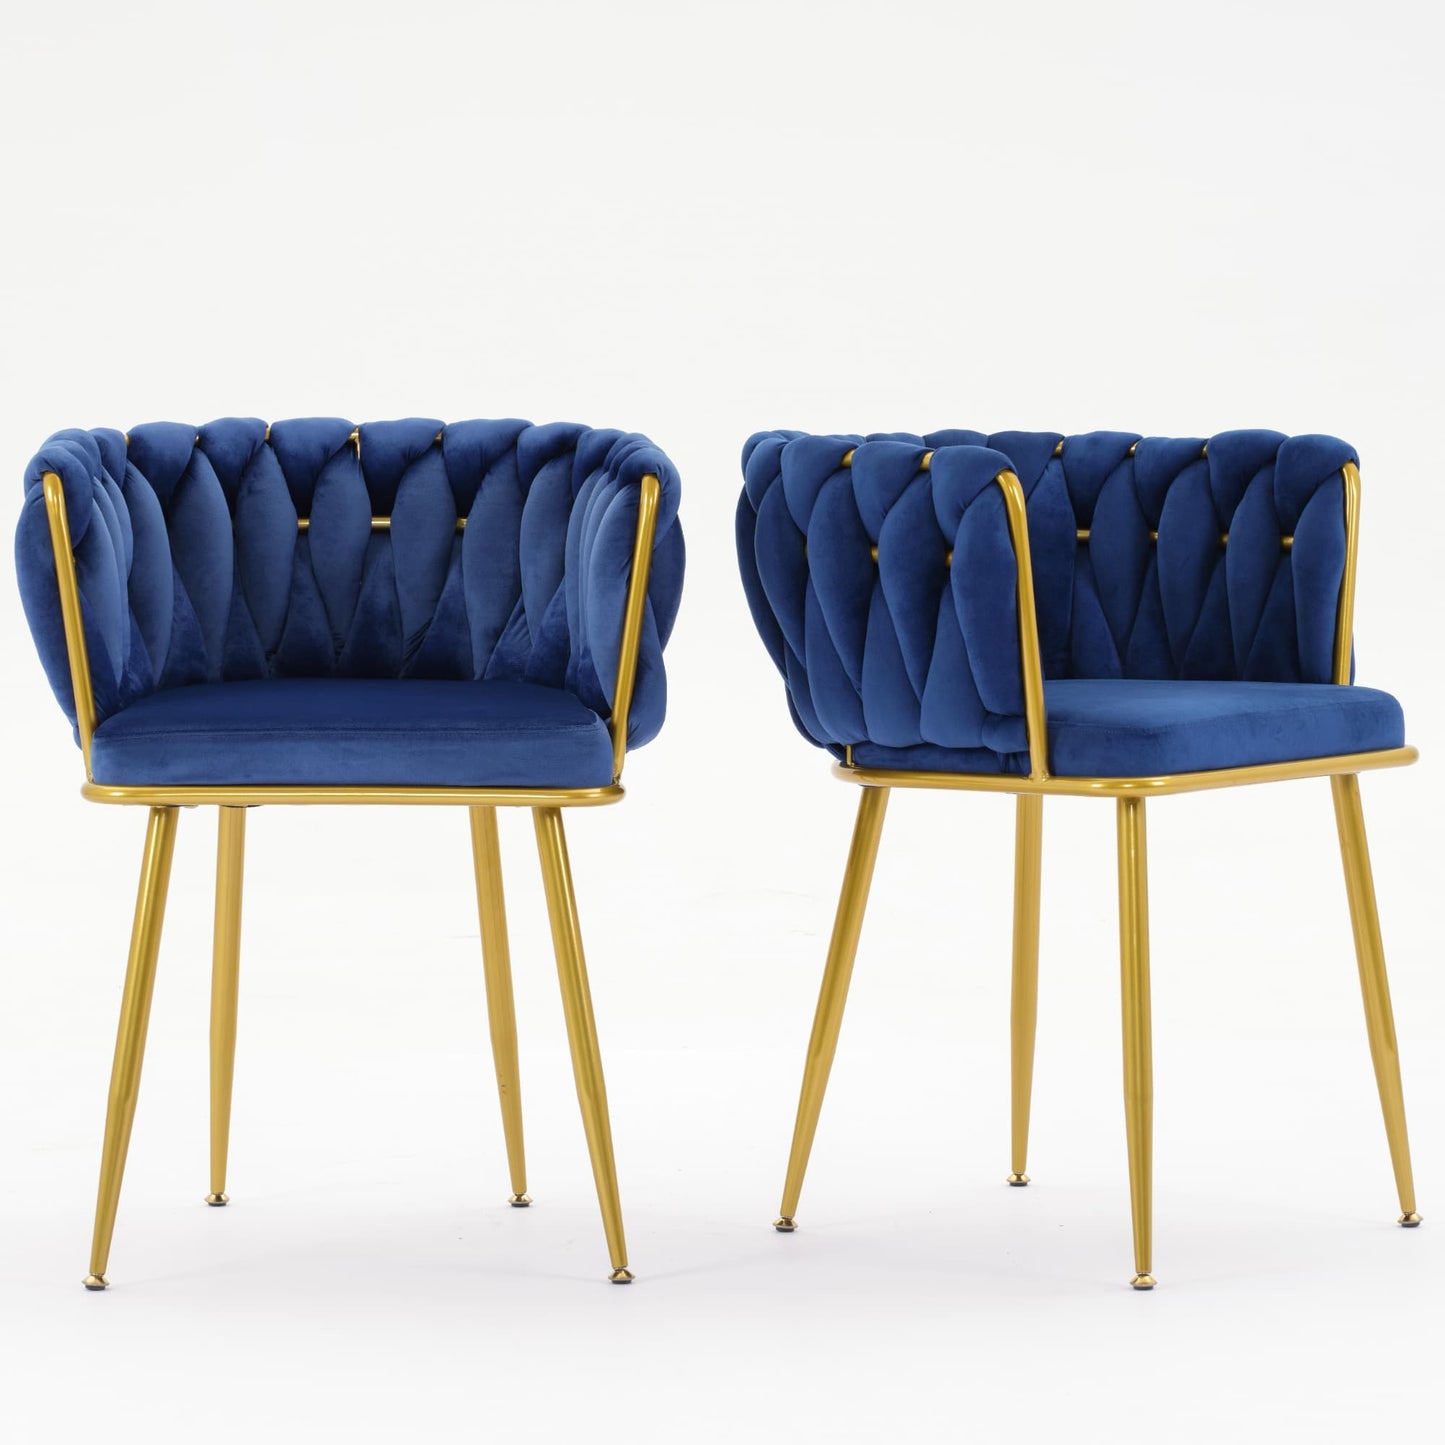 SogesPower Velvet Accent Chair Elegant Comfy Single upholstered Chair with Gold Metal Legs, Set of 2- Blue